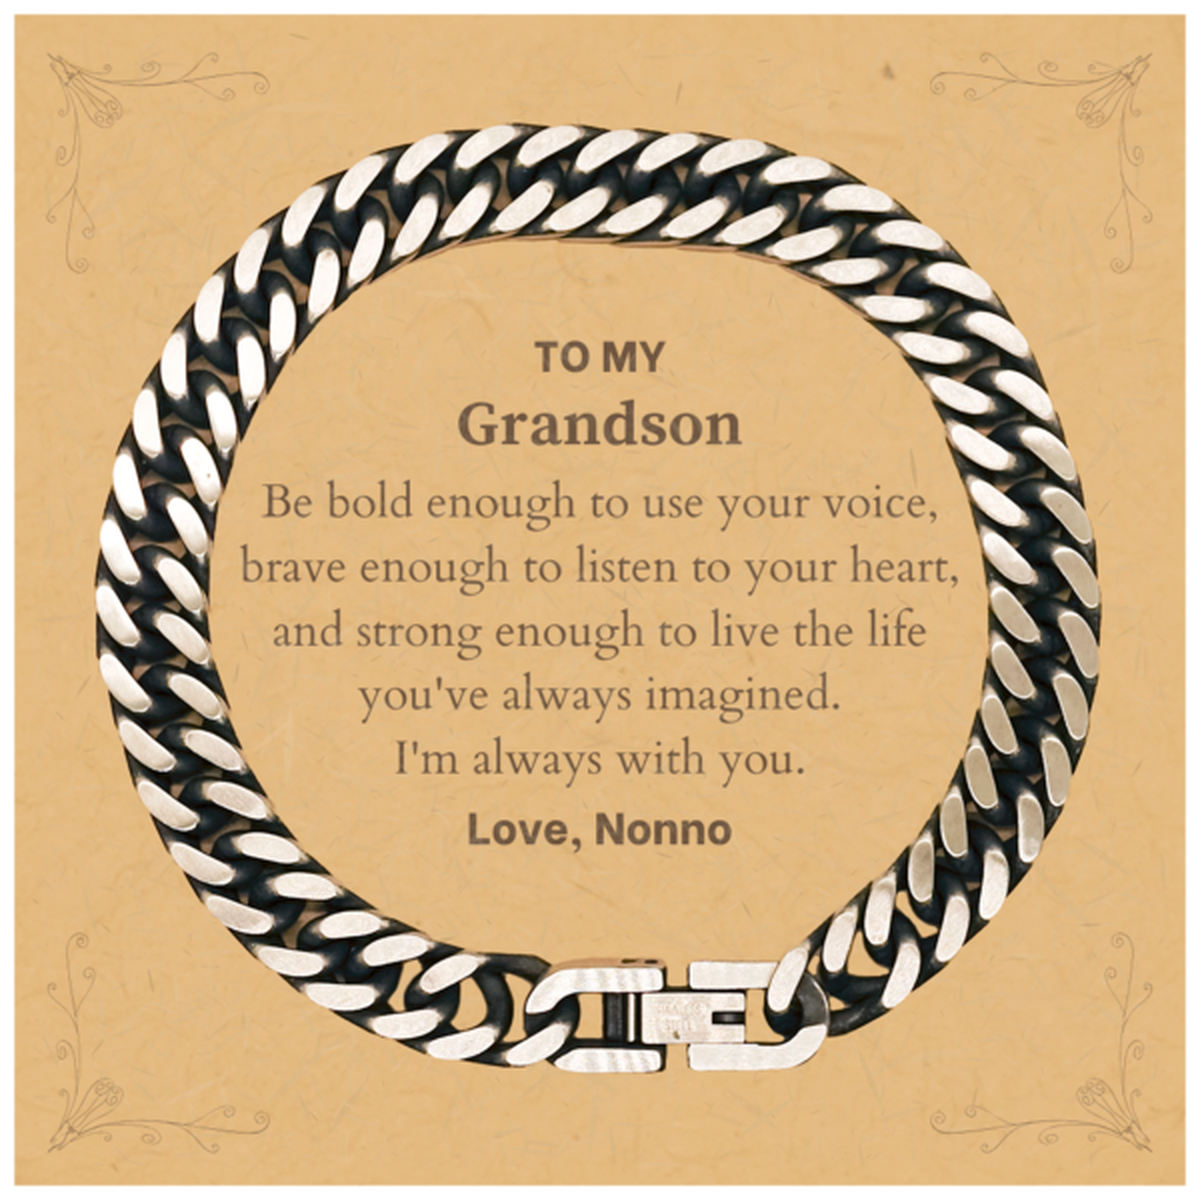 Keepsake Grandson Cuban Link Chain Bracelet Gift Idea Graduation Christmas Birthday Grandson from Nonno, Grandson Be bold enough to use your voice, brave enough to listen to your heart. Love, Nonno